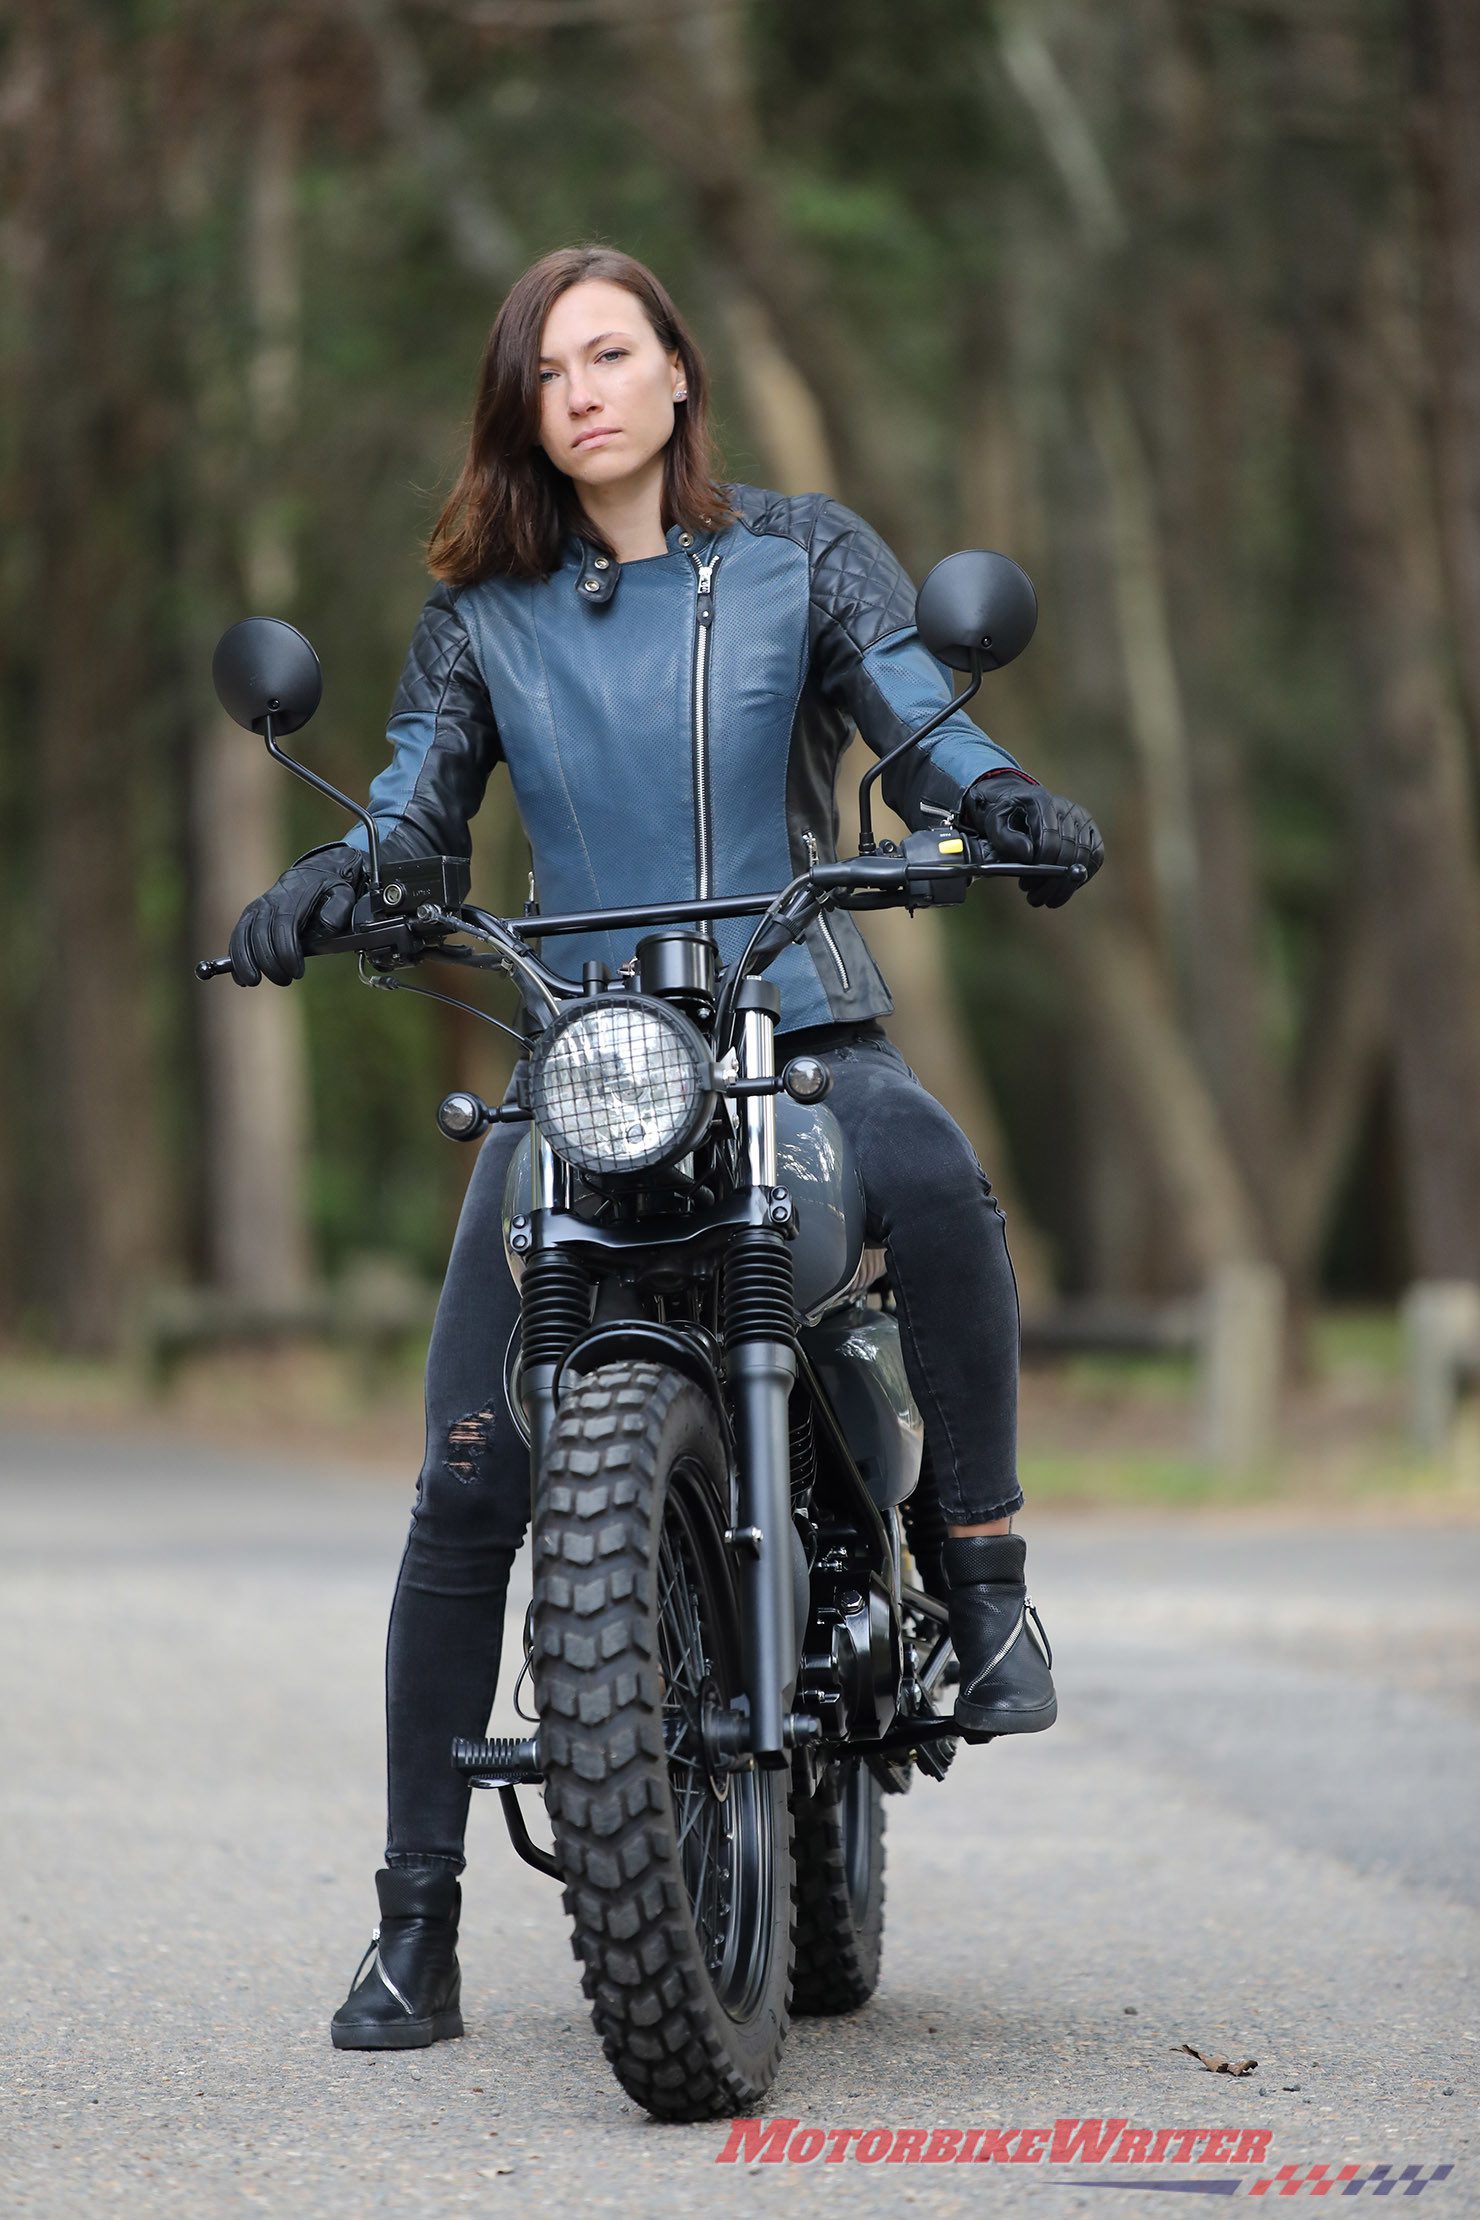 Can female riders wear men's motorcycle gear? (and vice versa